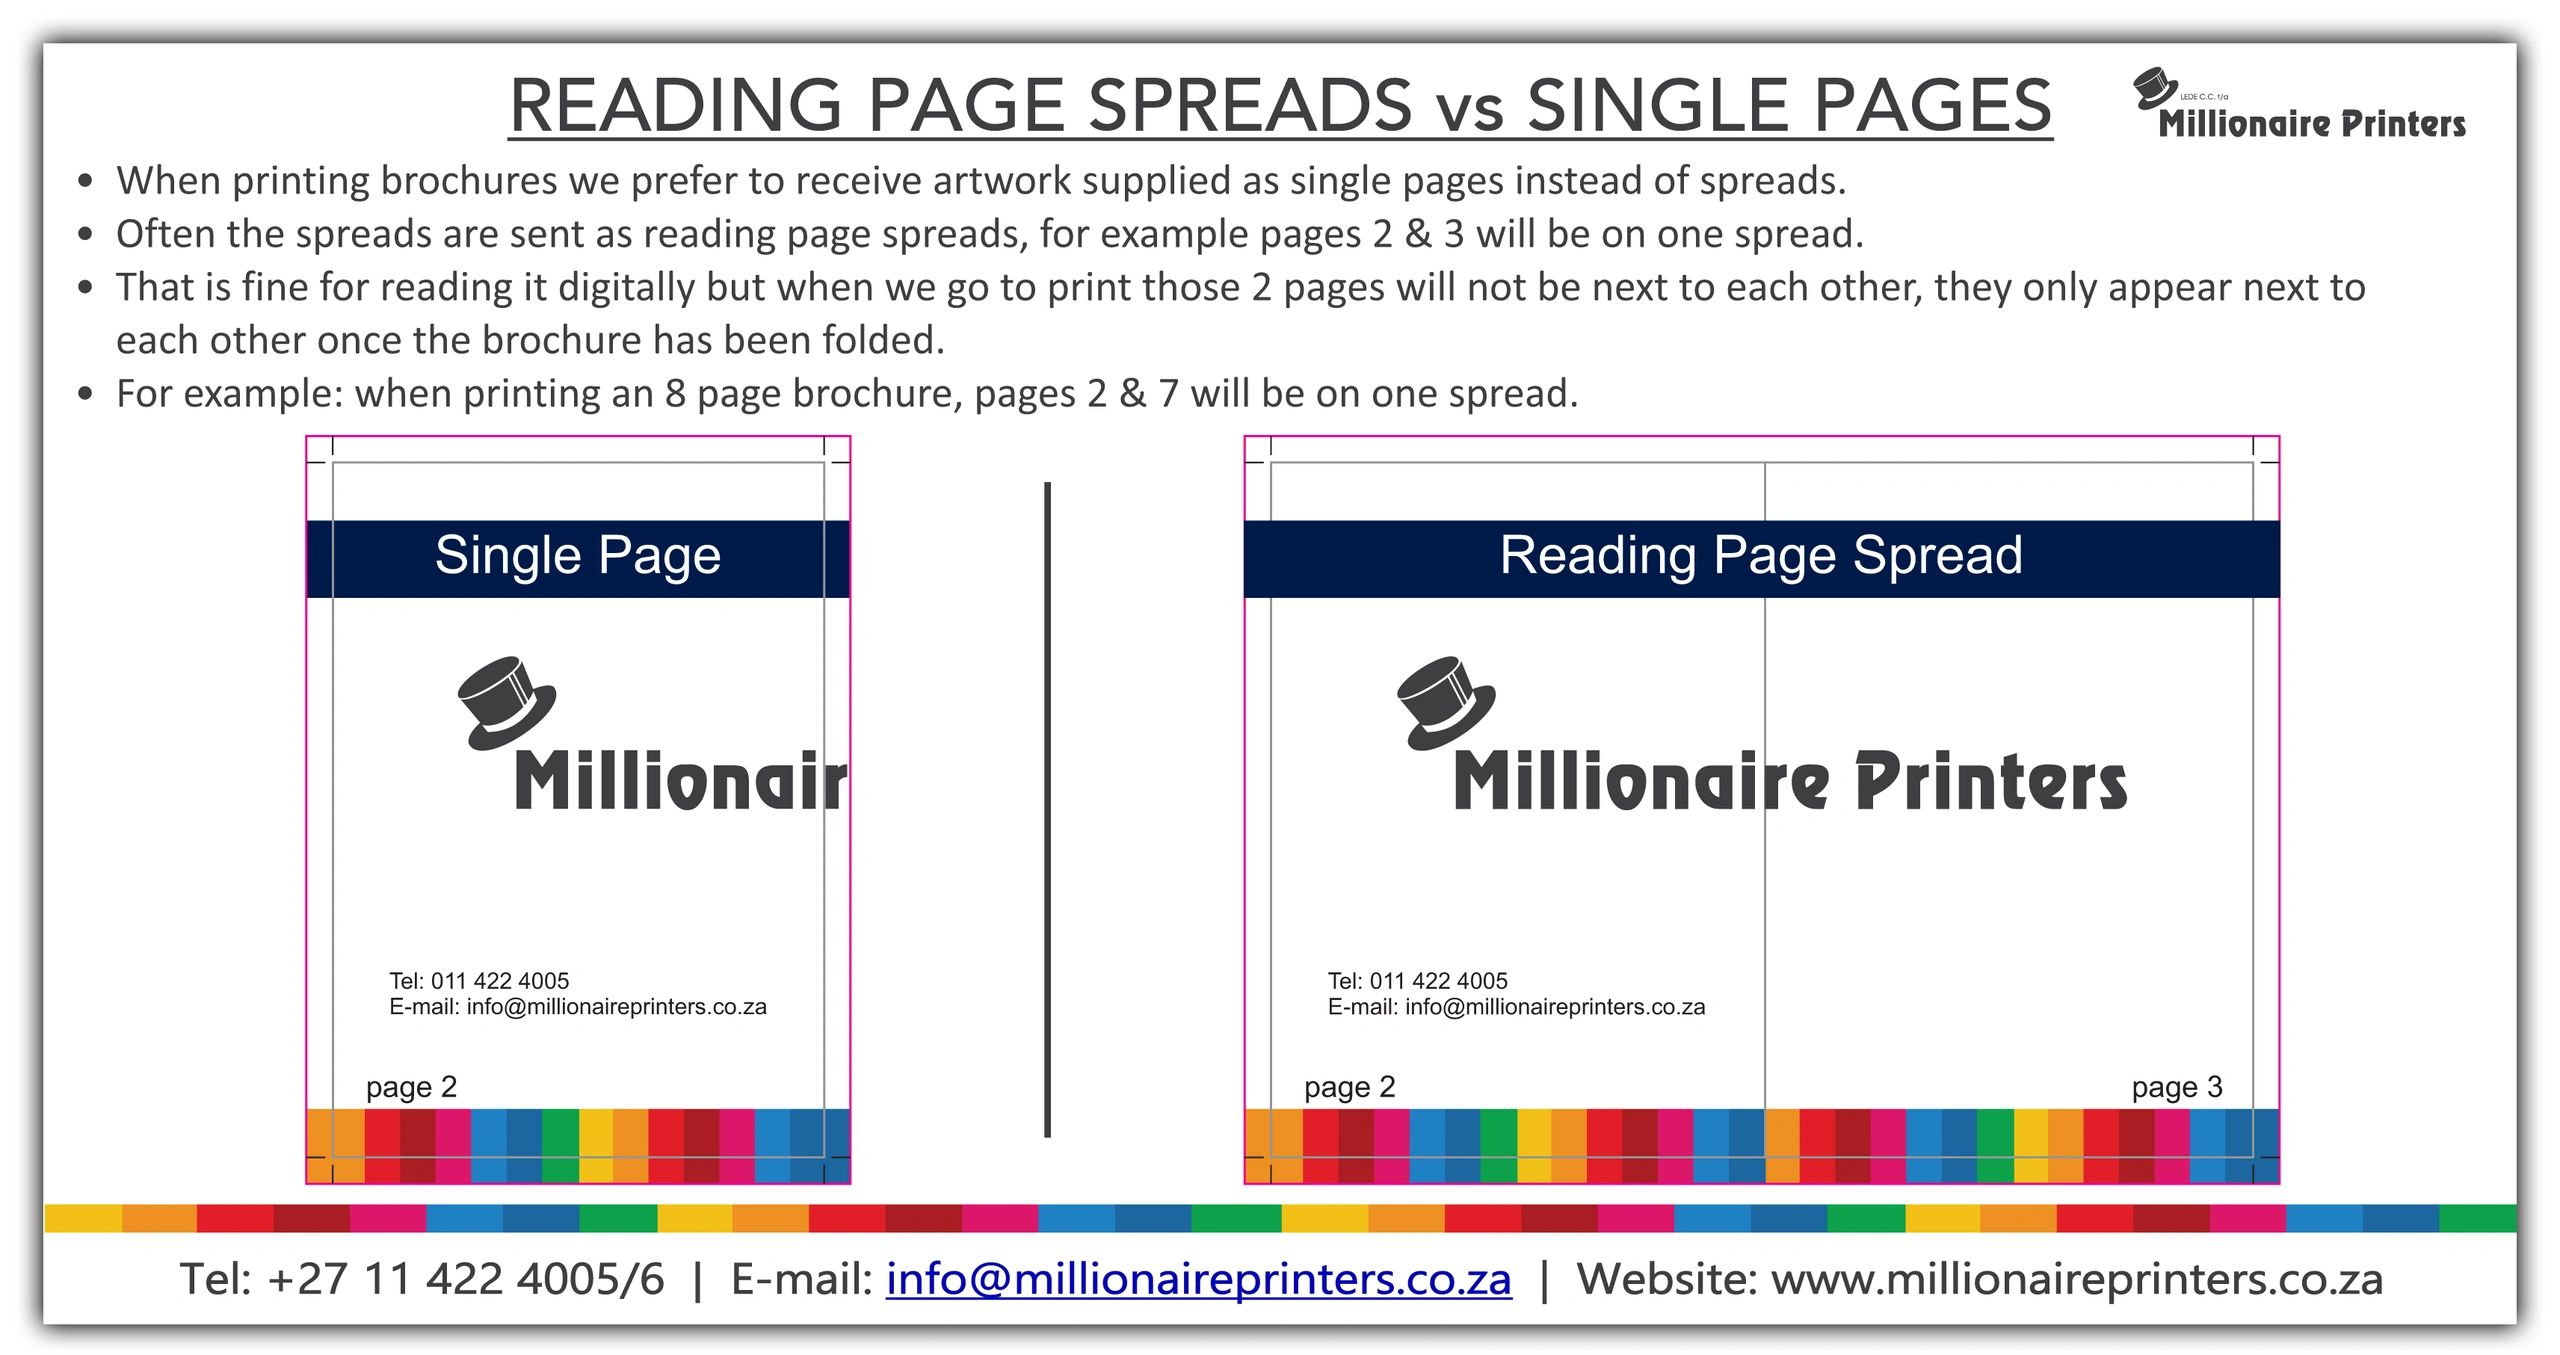 It is important to understand the difference between single and reading pages when printing books.